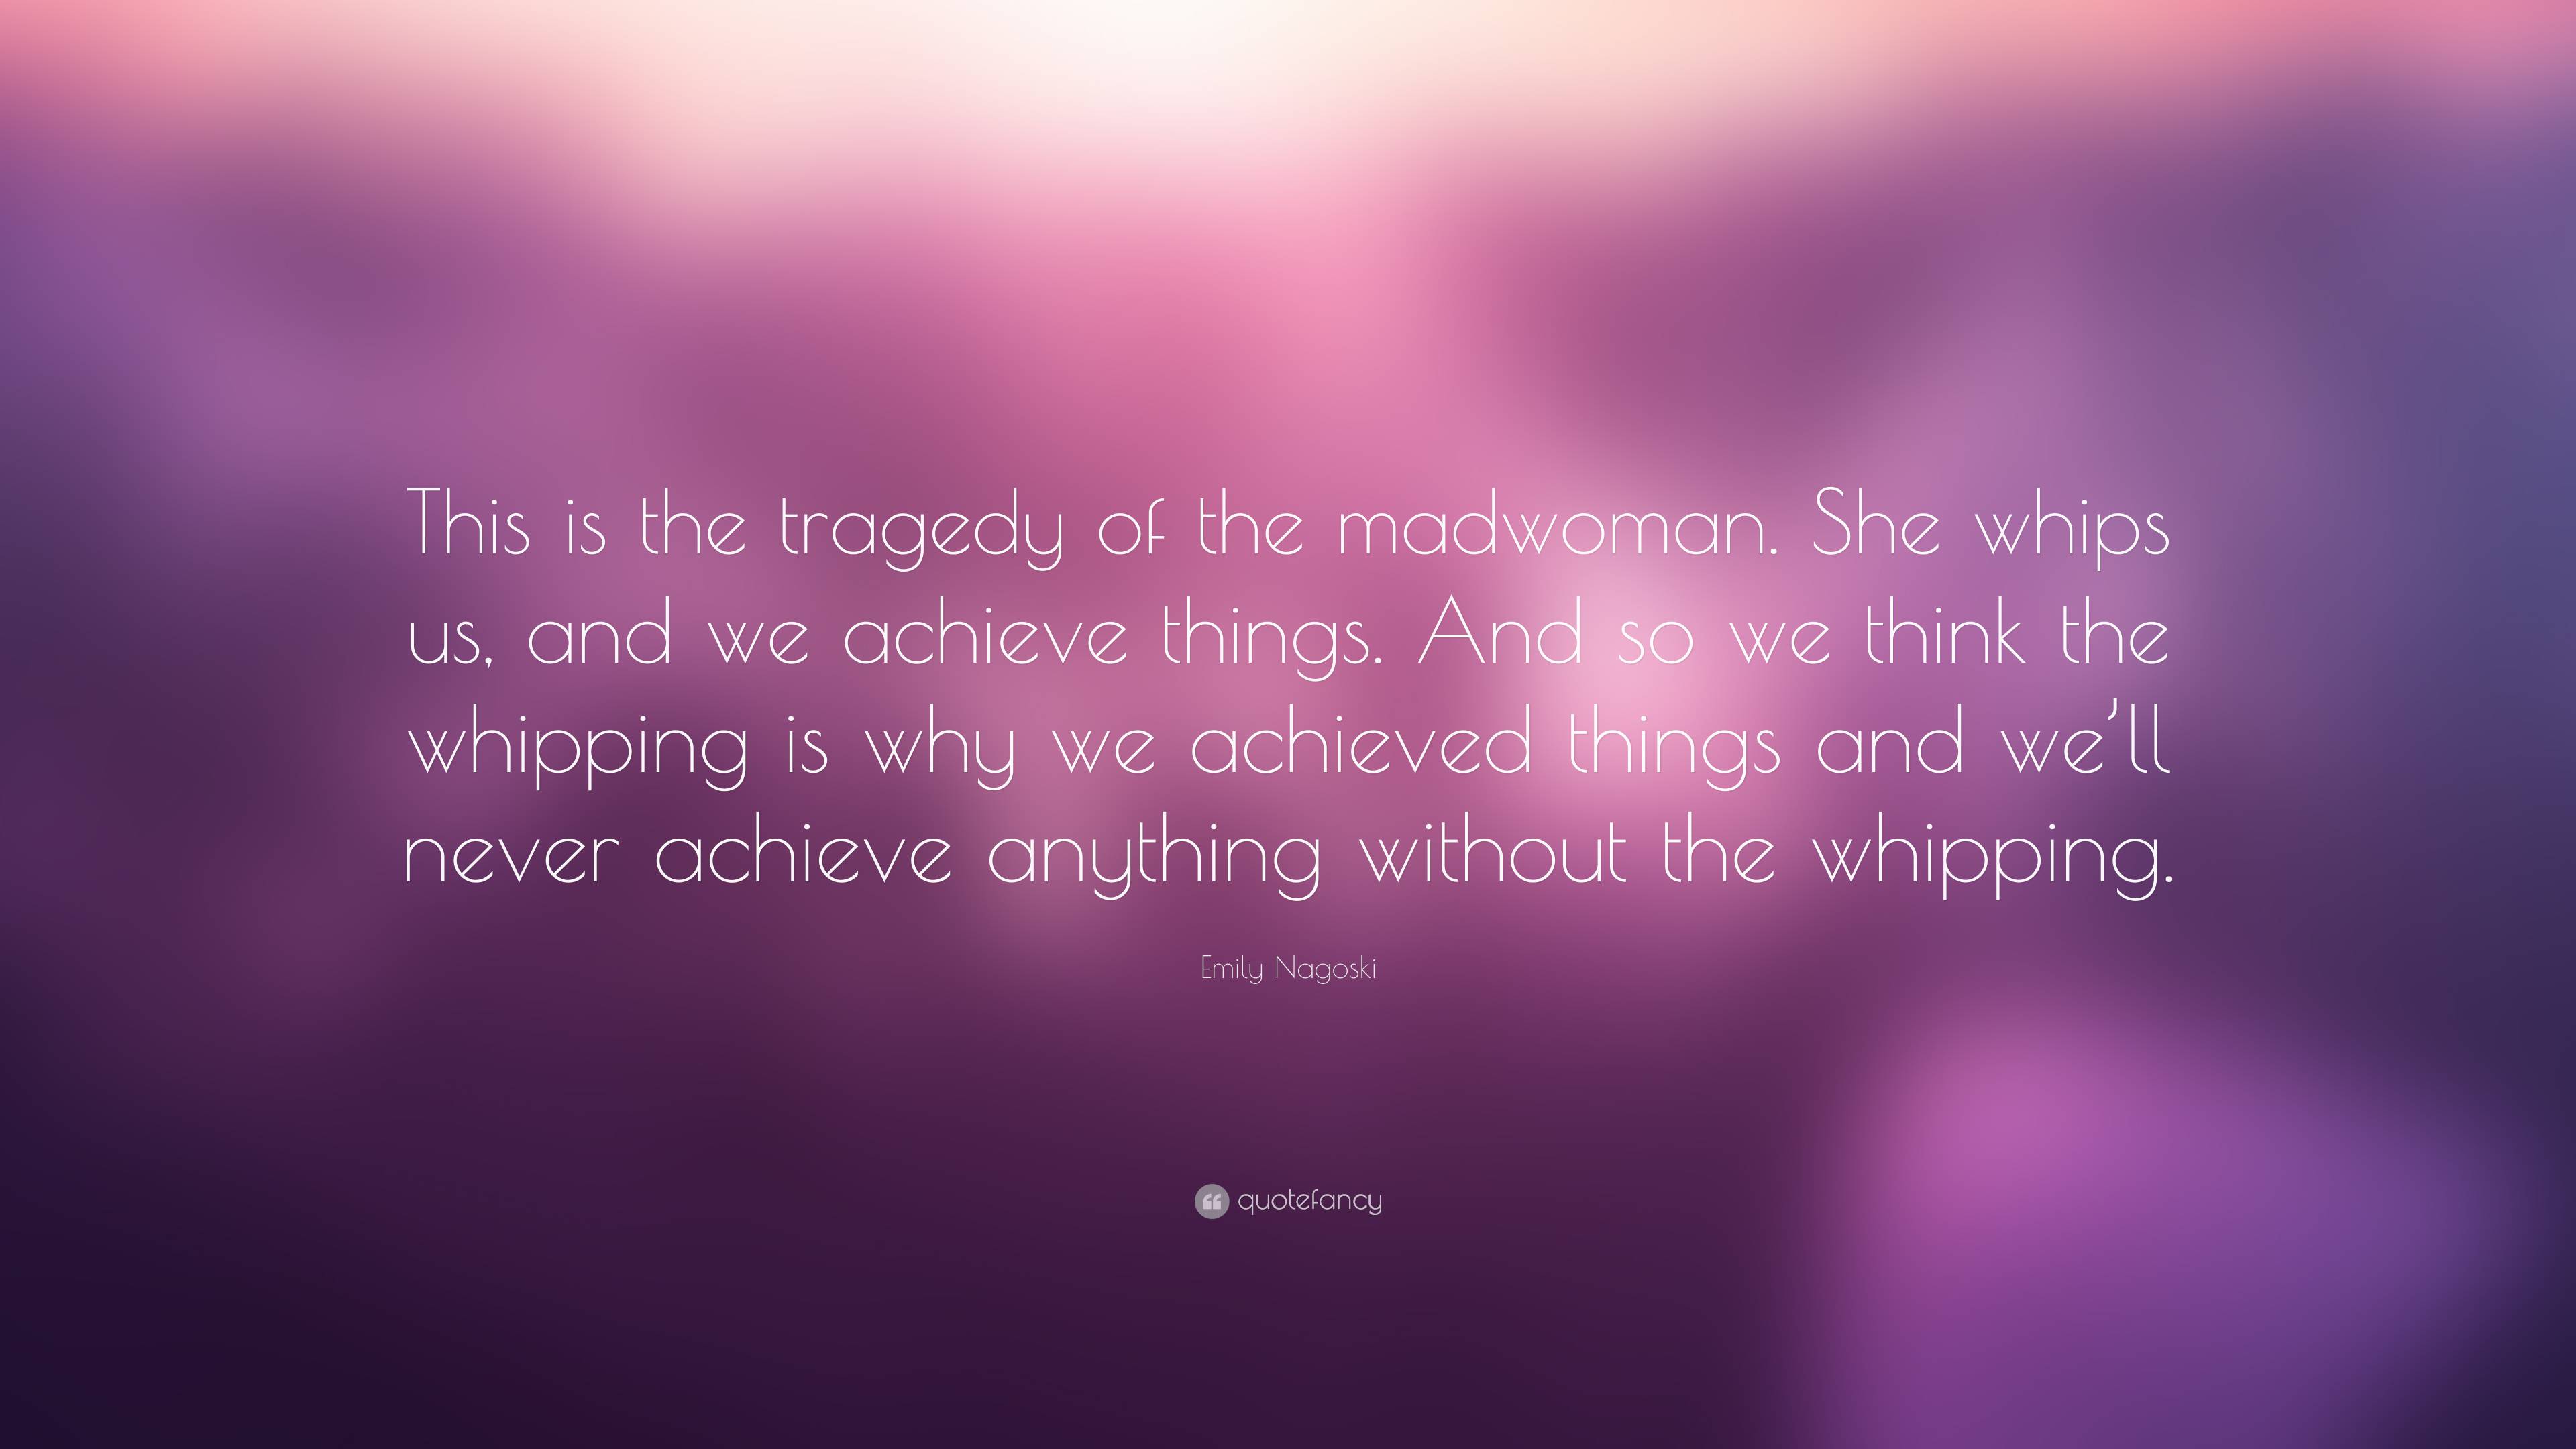 Emily Nagoski Quote: “This is the tragedy of the madwoman. She whips us ...